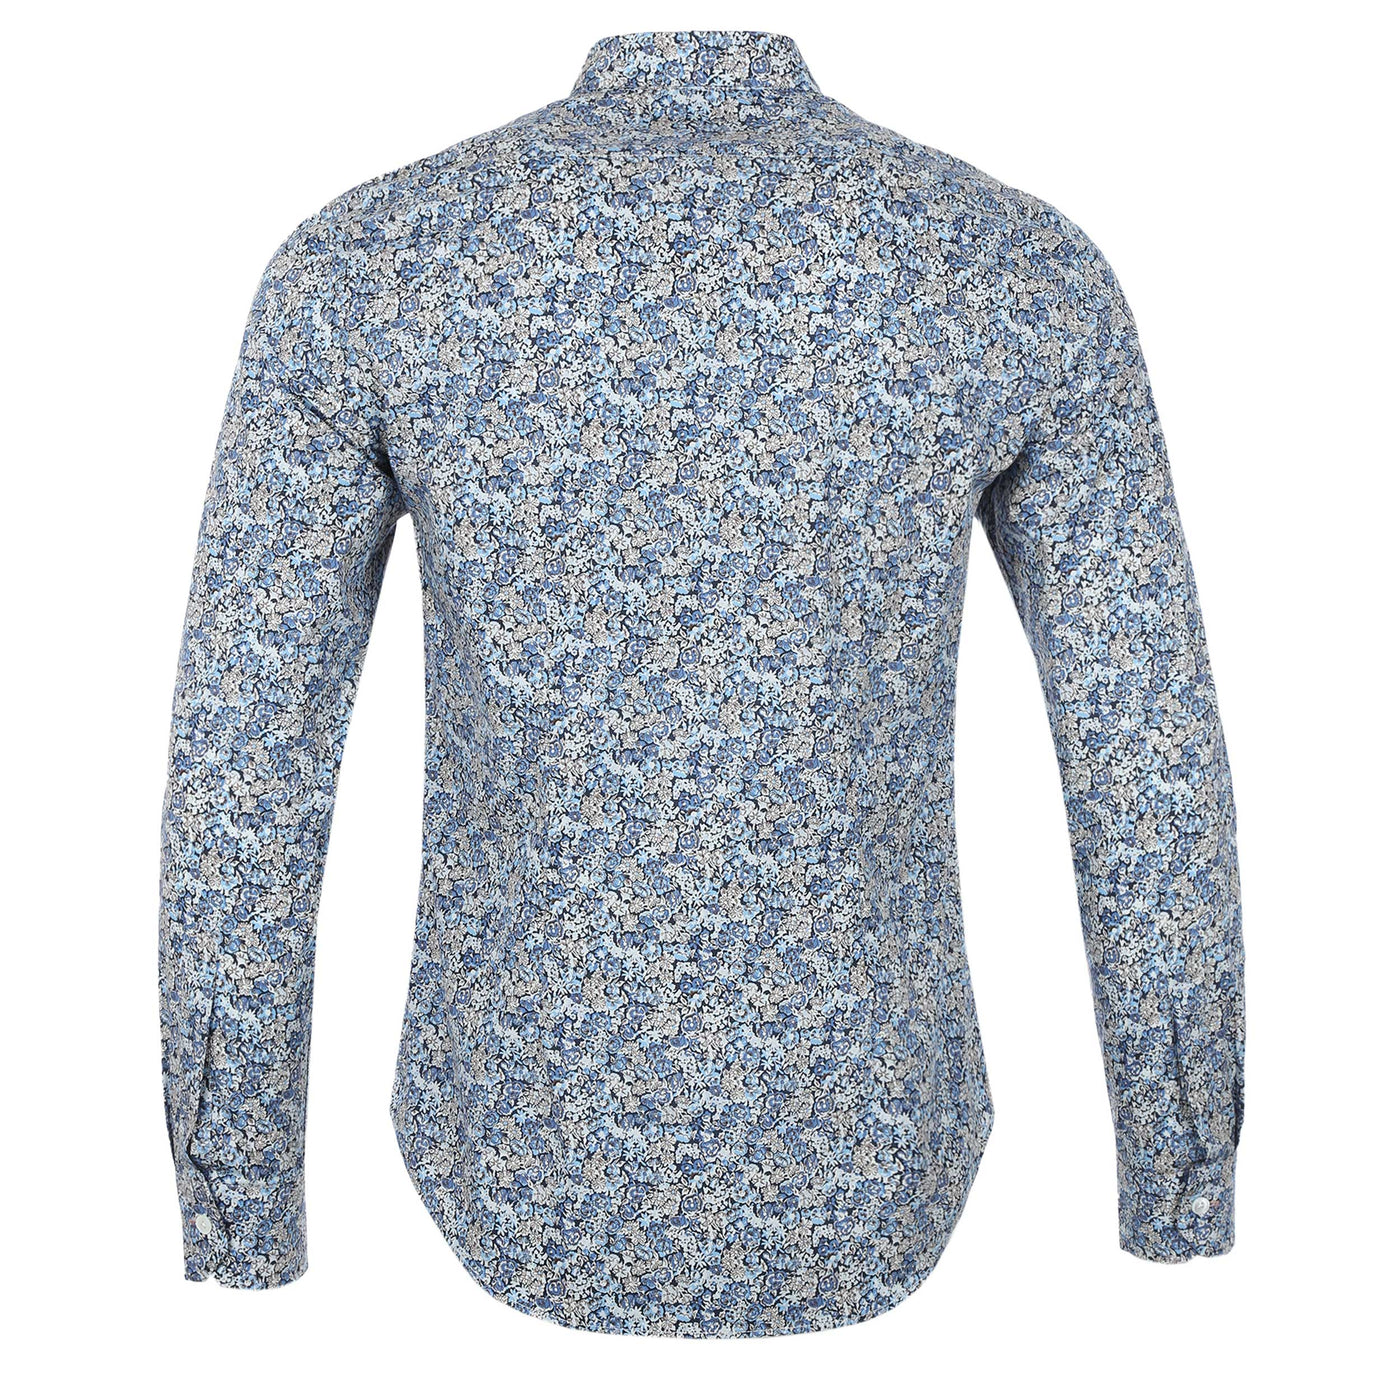 Paul Smith Slim Fit Floral Print Shirt in Petrol Blue Back